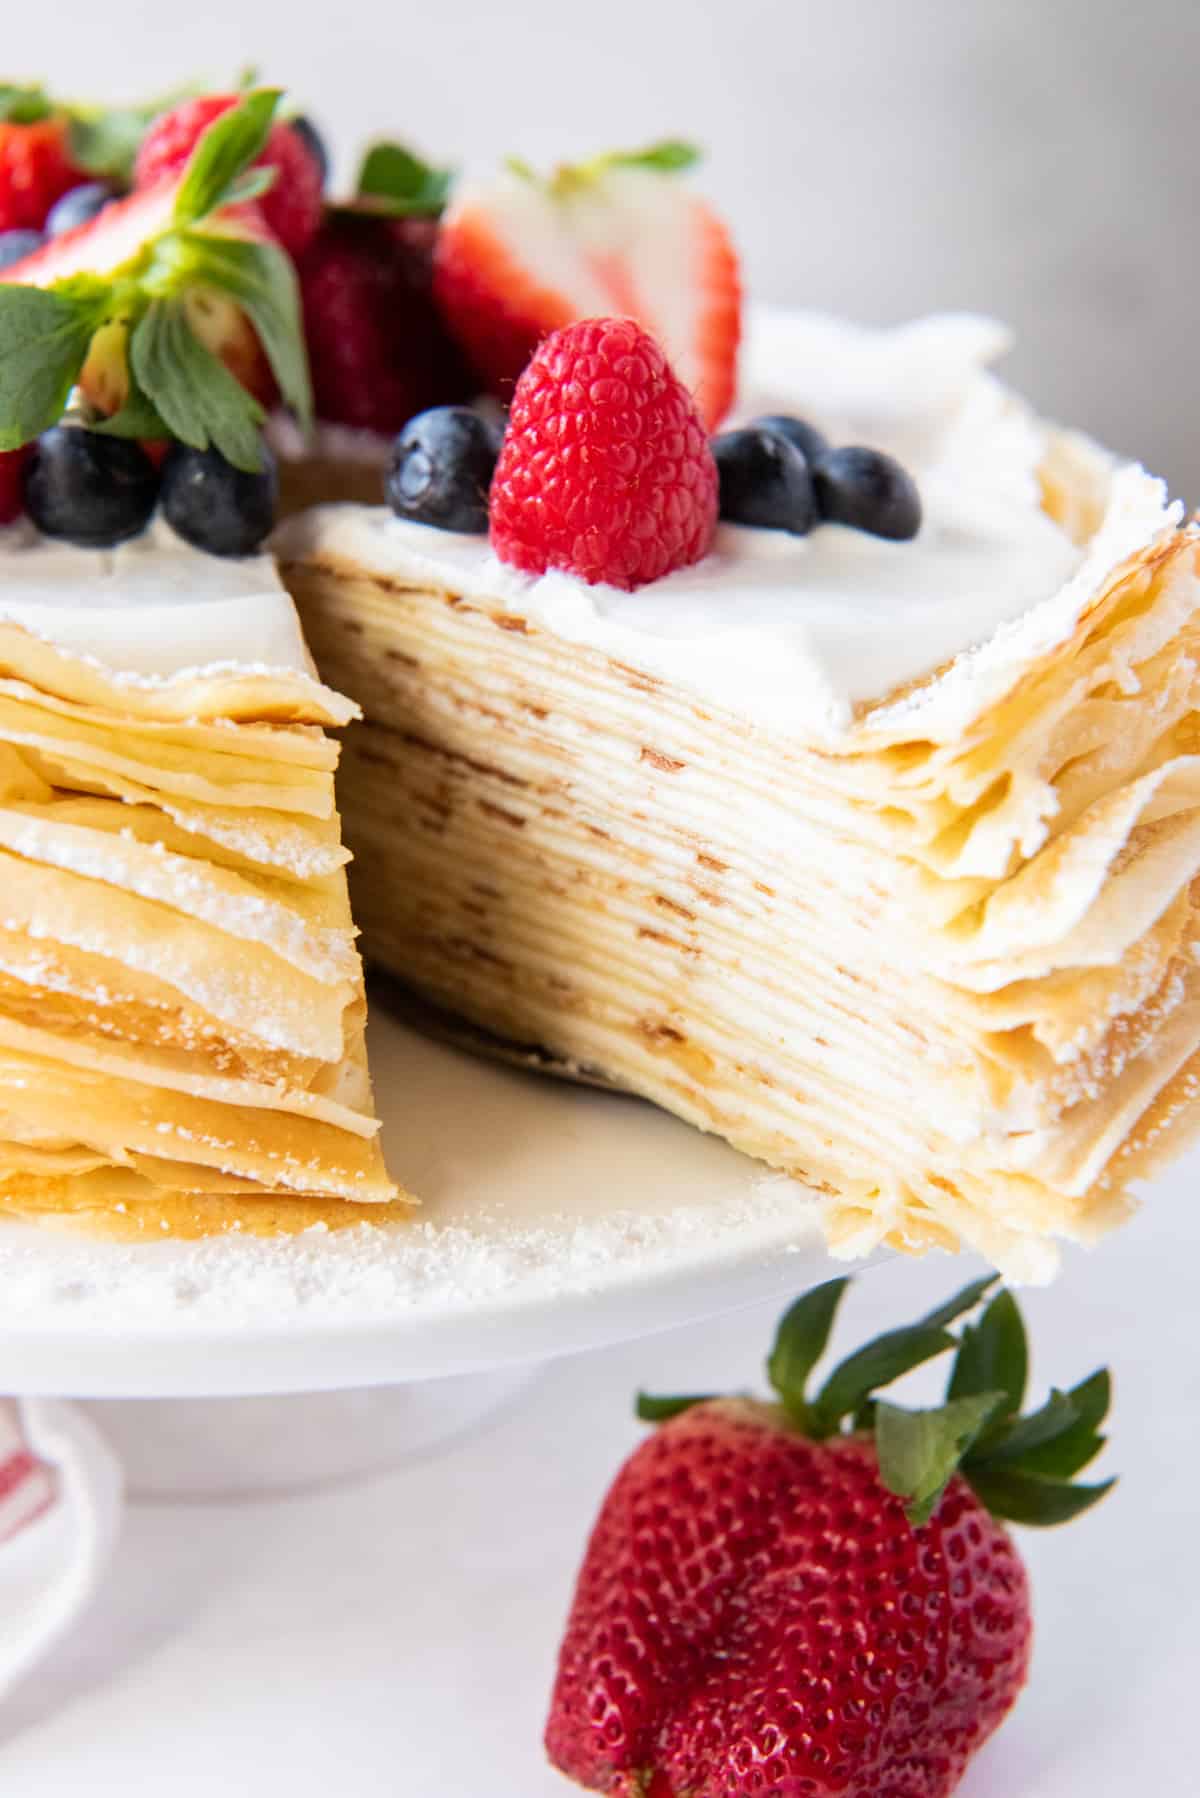 Luscious Piece of Crepe Layer Cake with Berries